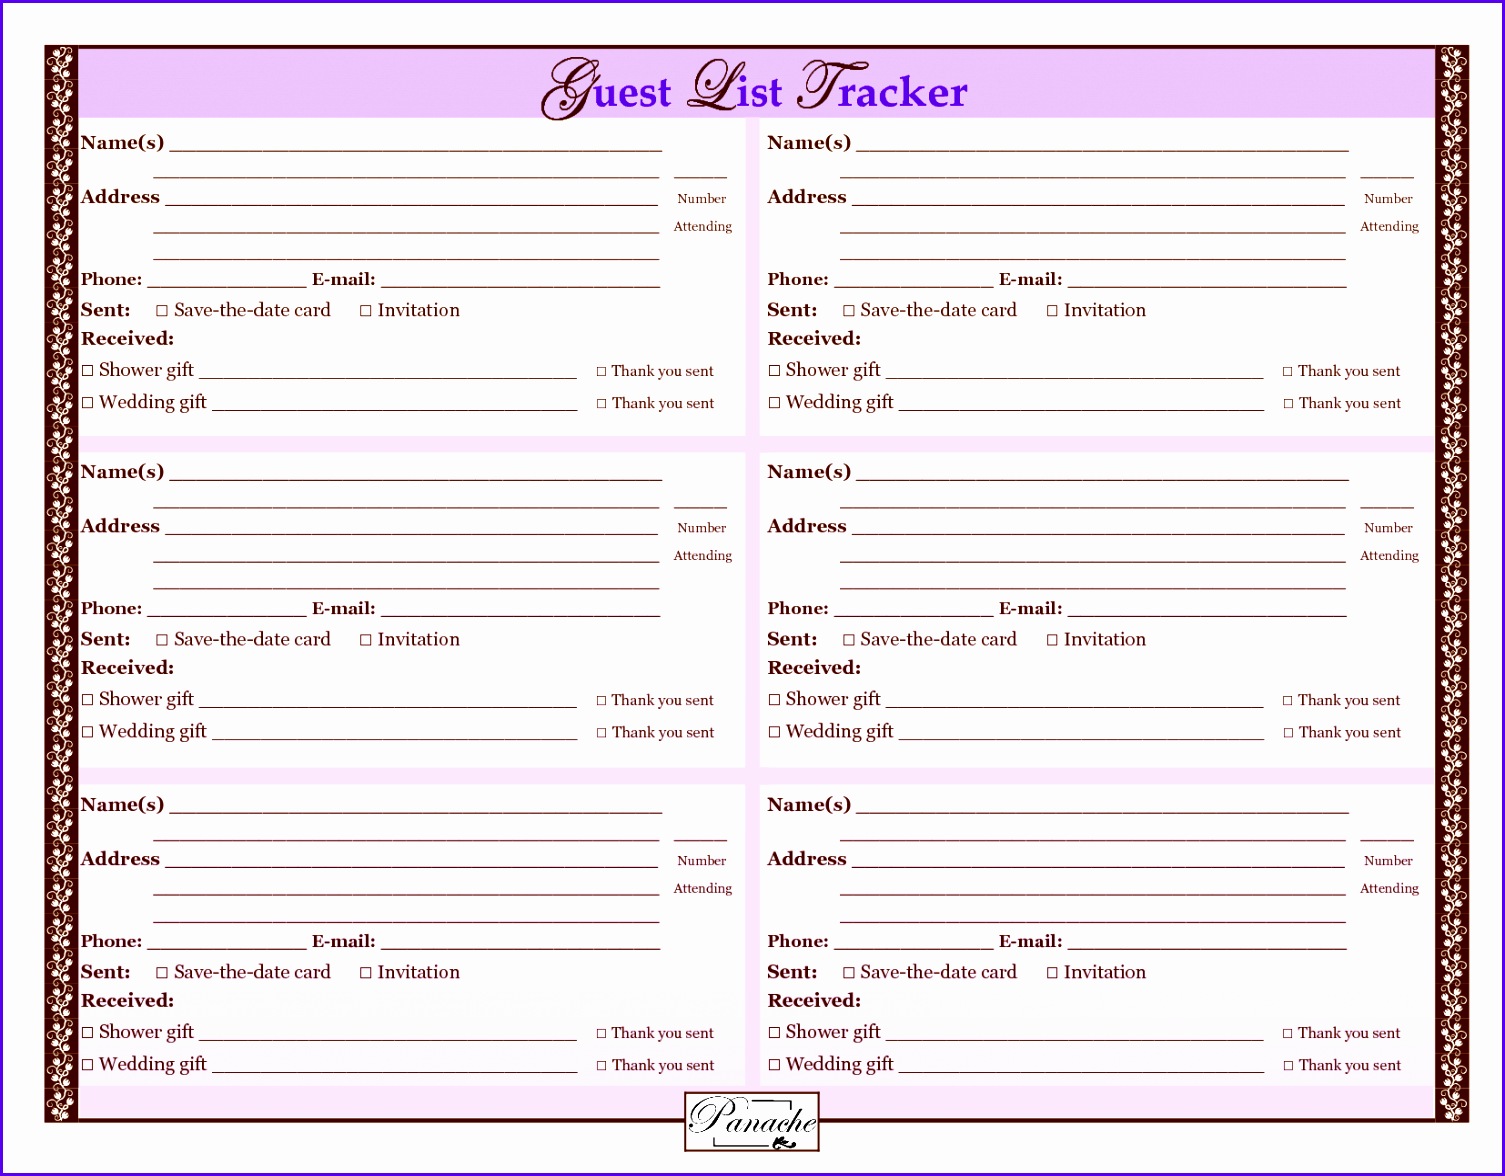 excel guest list template 15051176